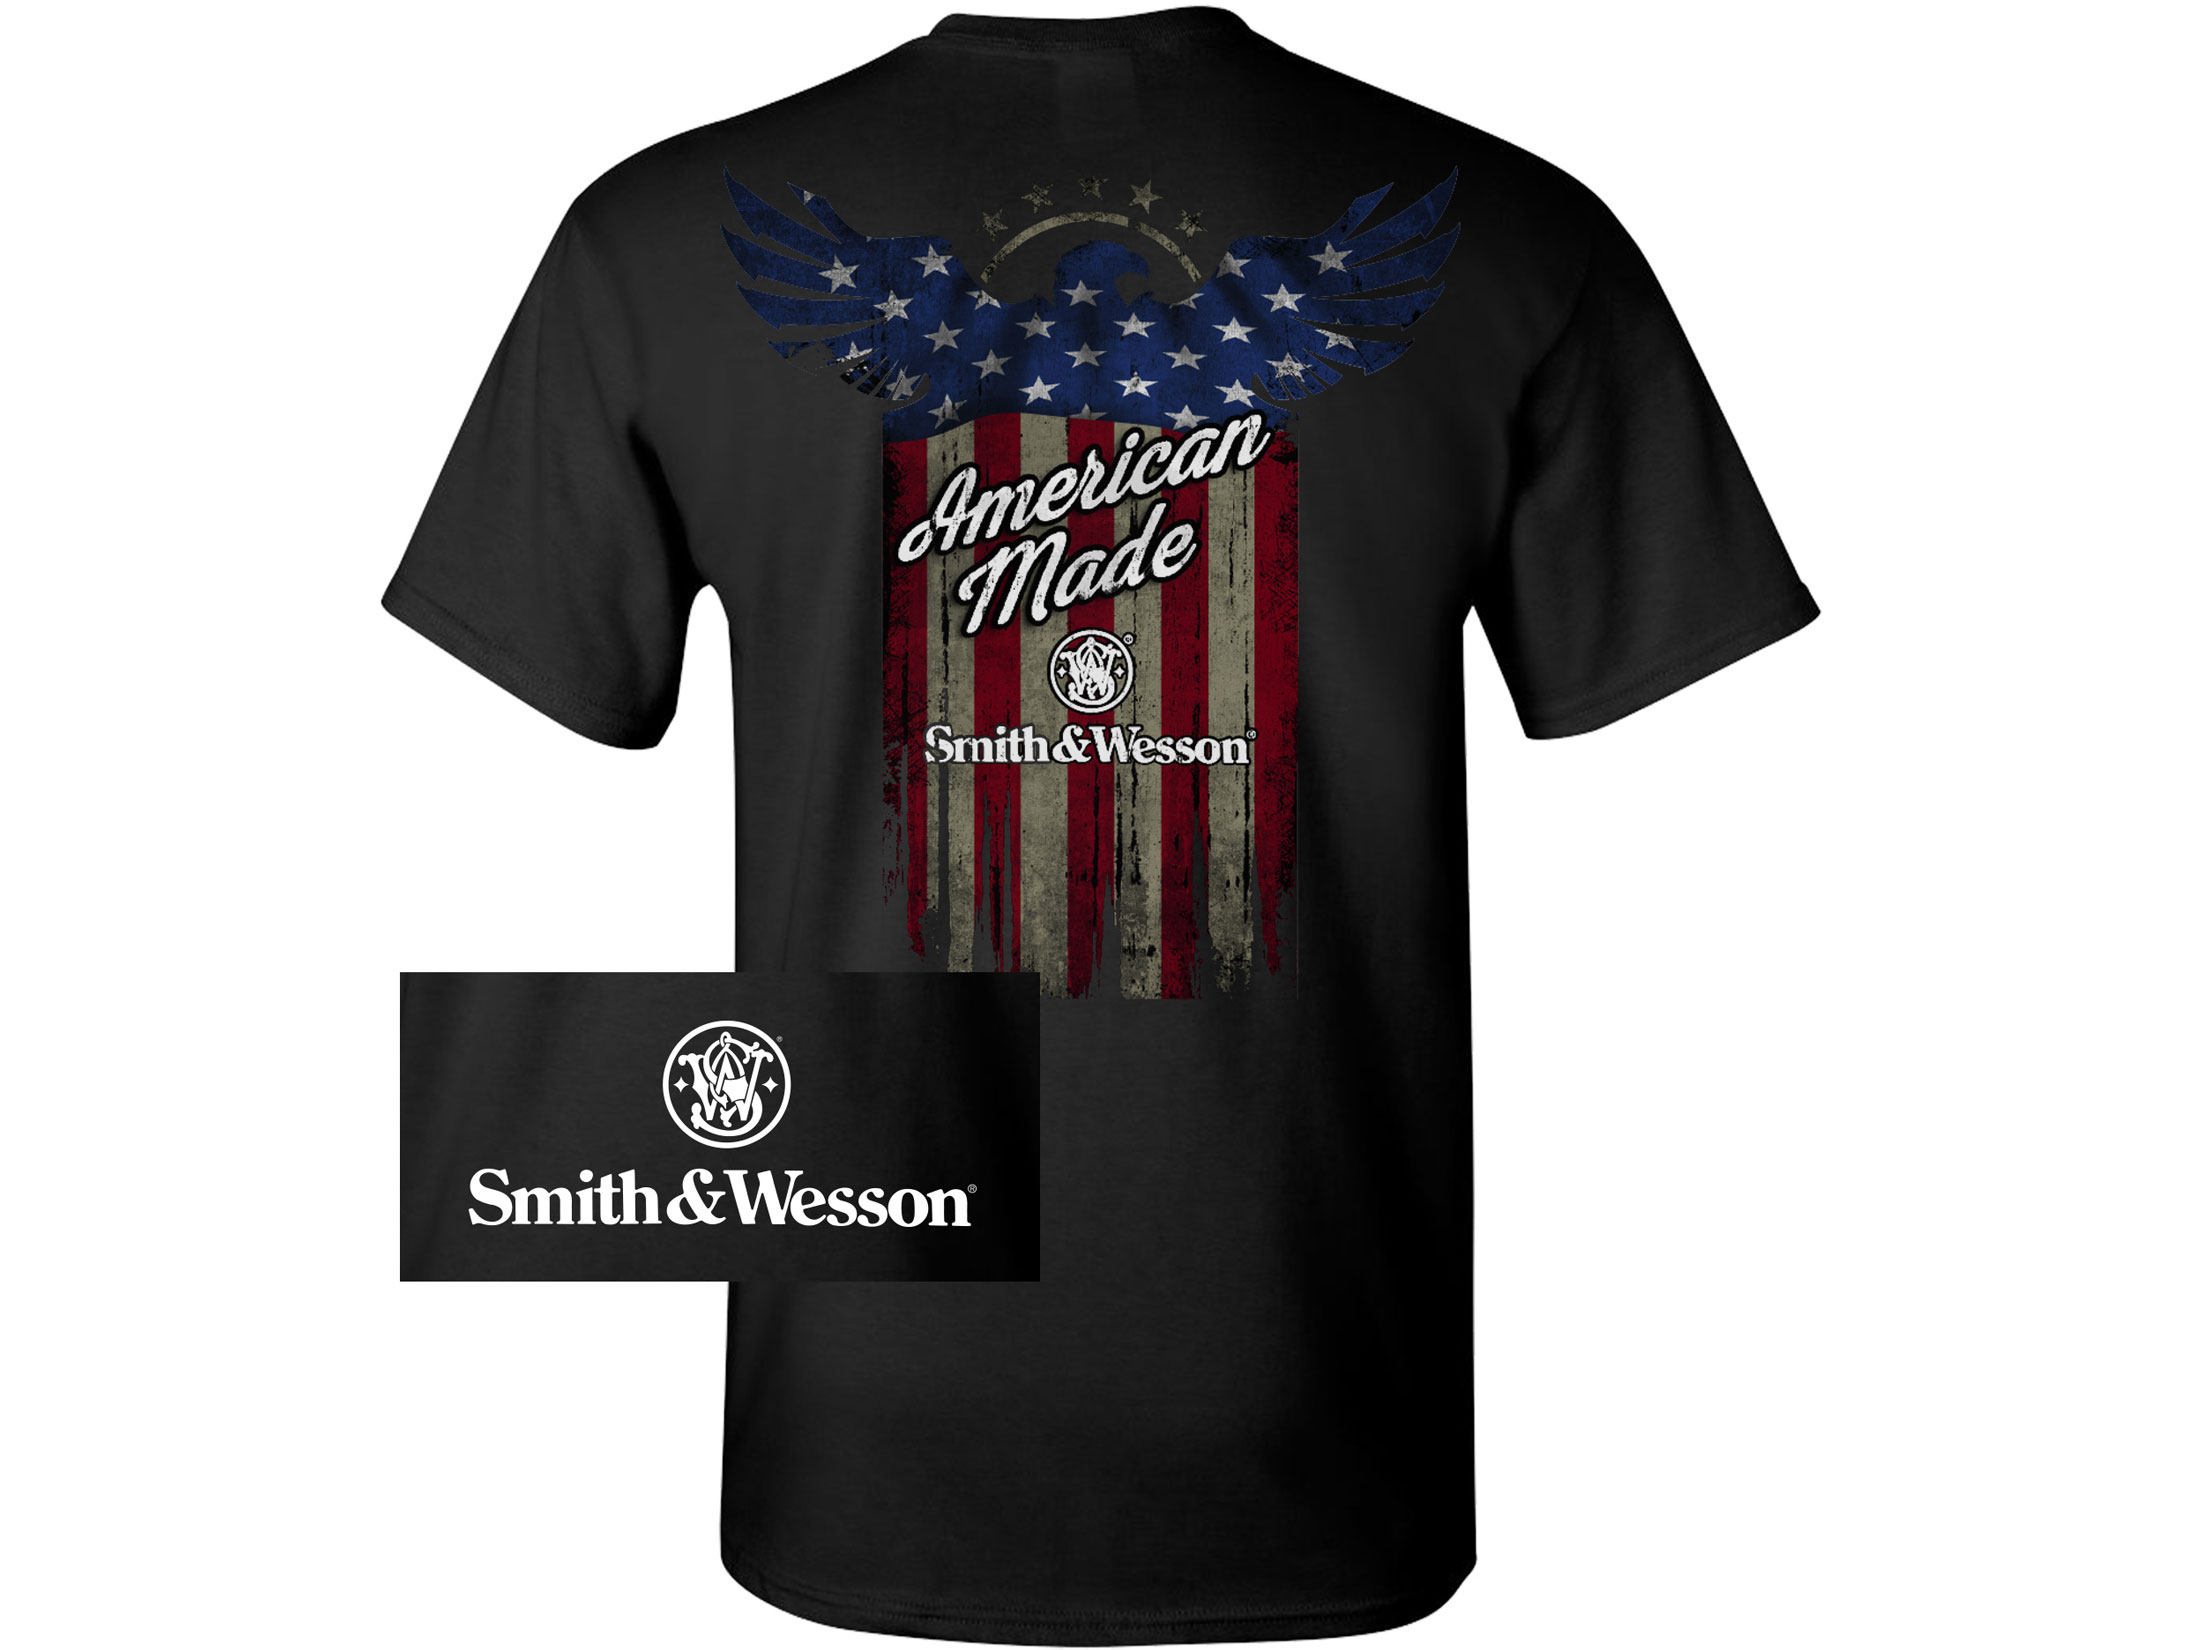 Smith, Wesson Men's Distressed American Made Logo T-Shirt Short Sleeve